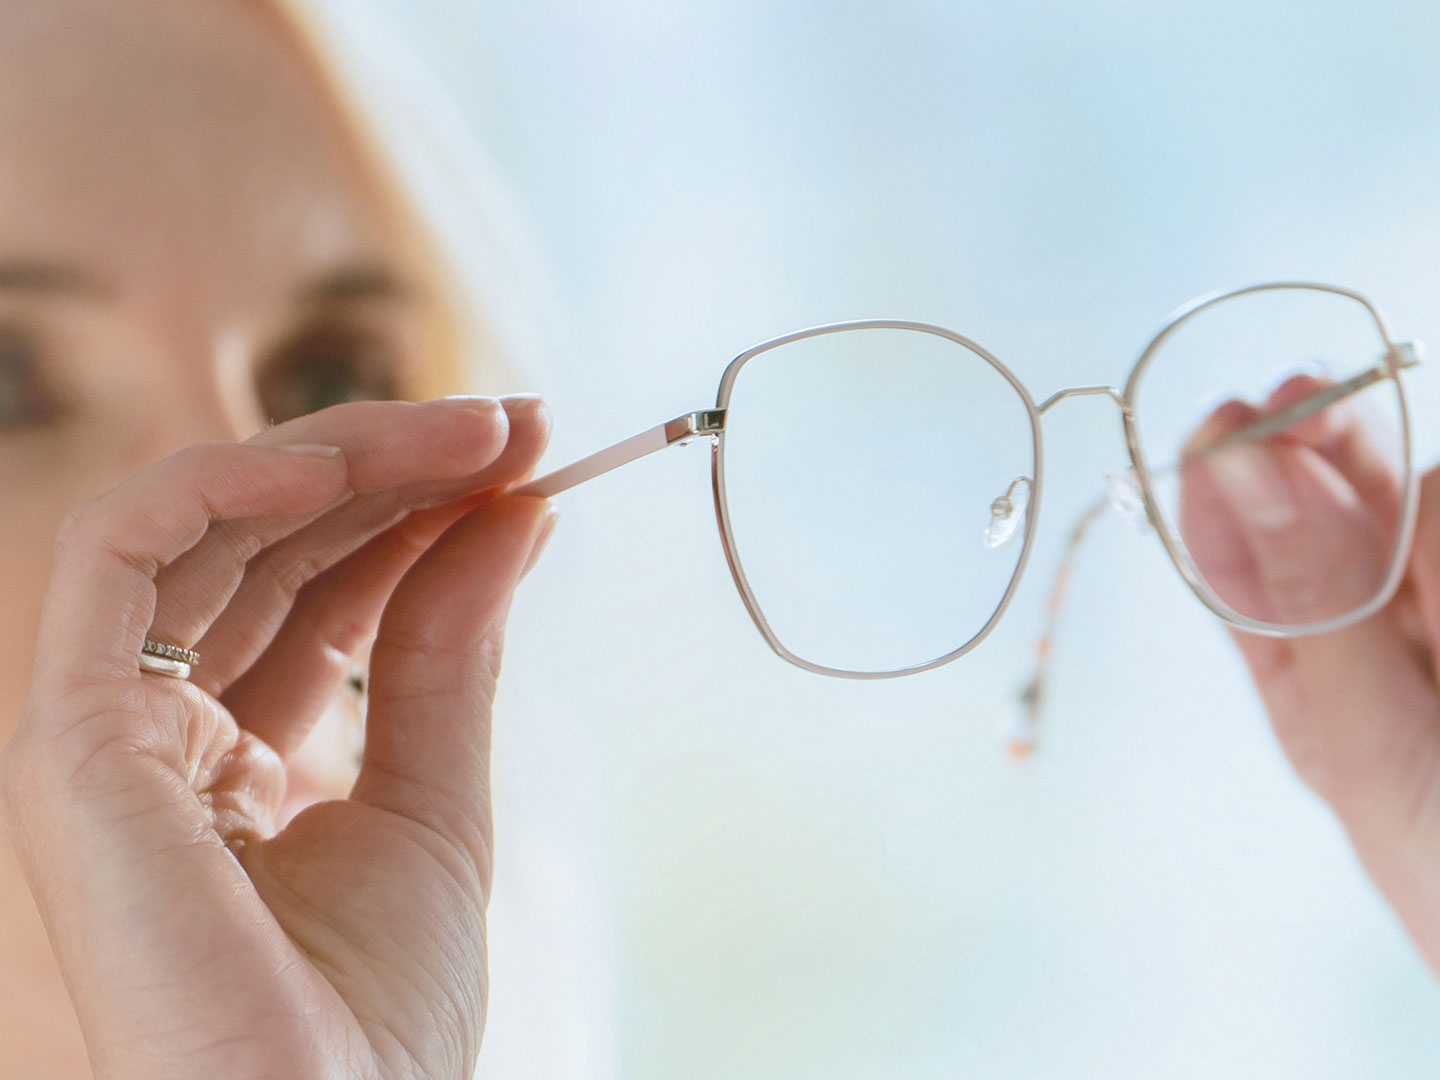 A woman observing the inner side of the glasses